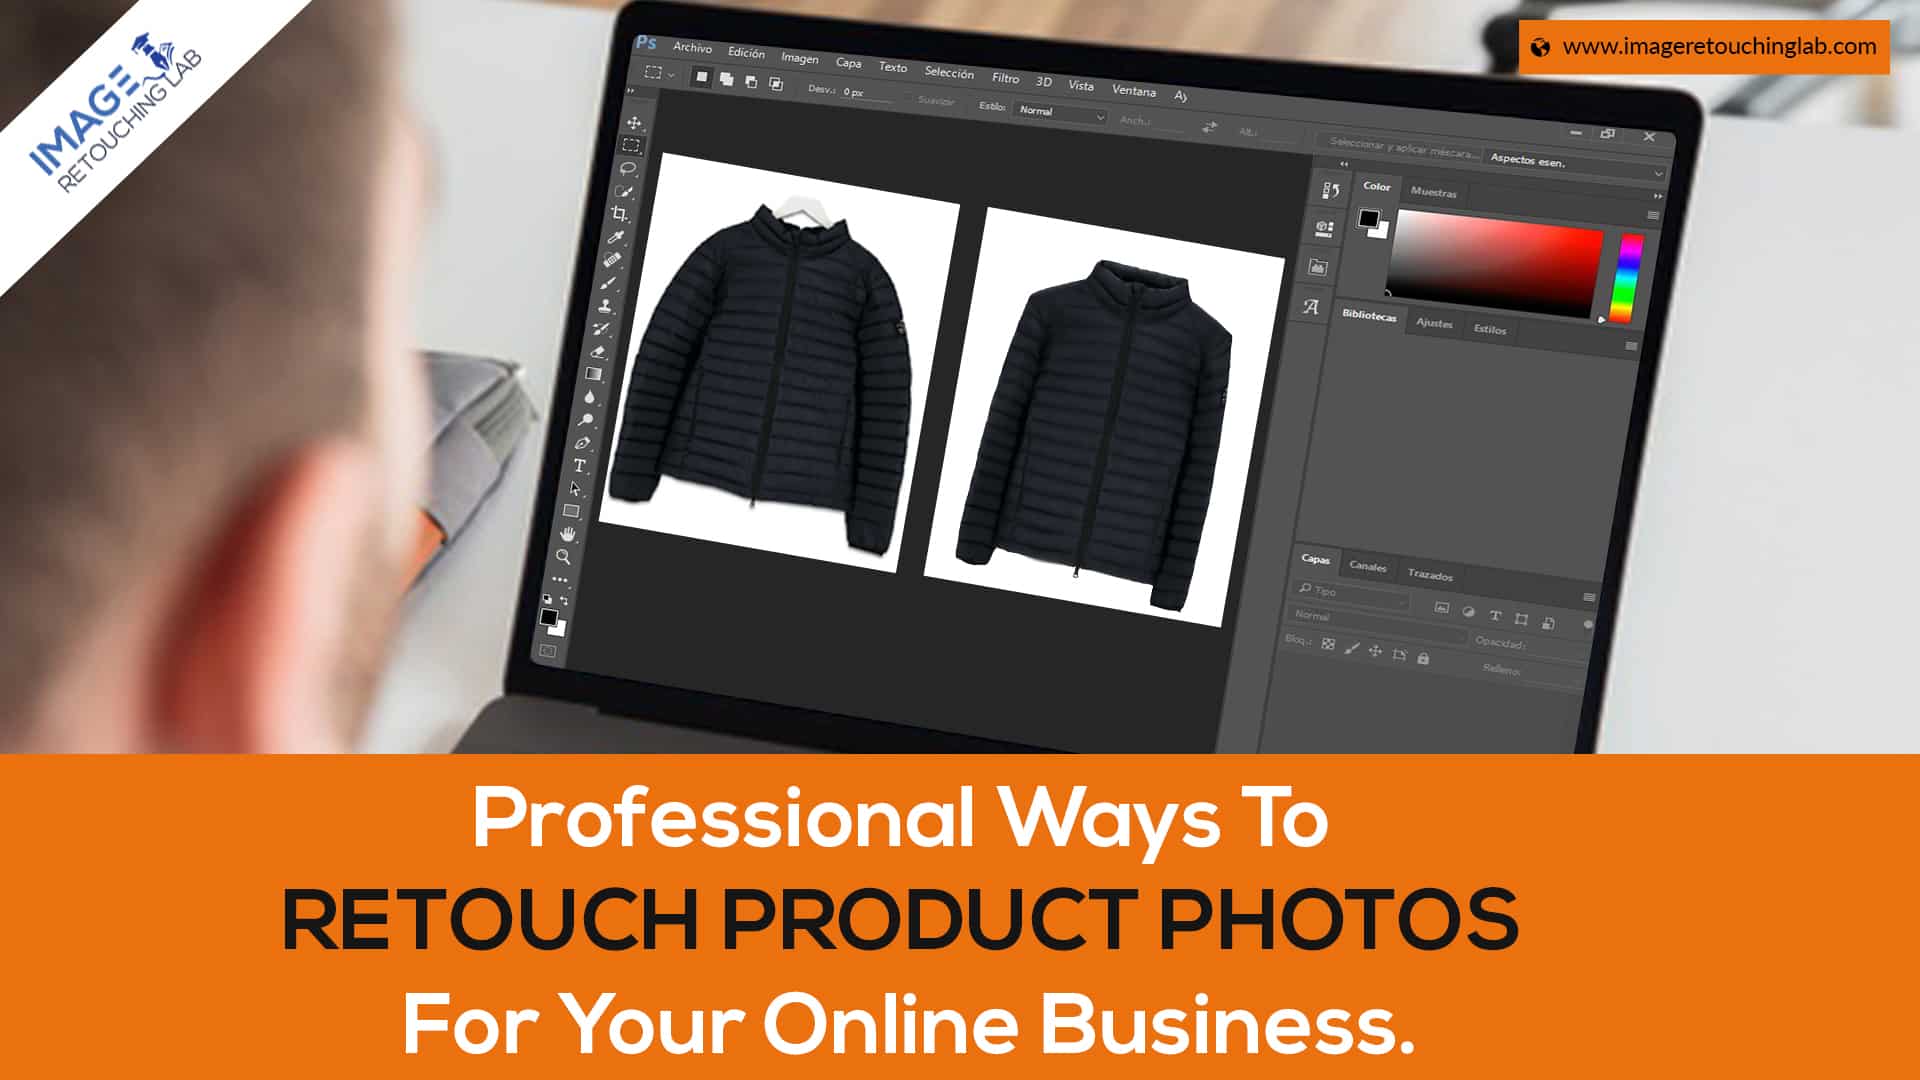 Professional Ways To Retouch Product Photos For Your Online Business